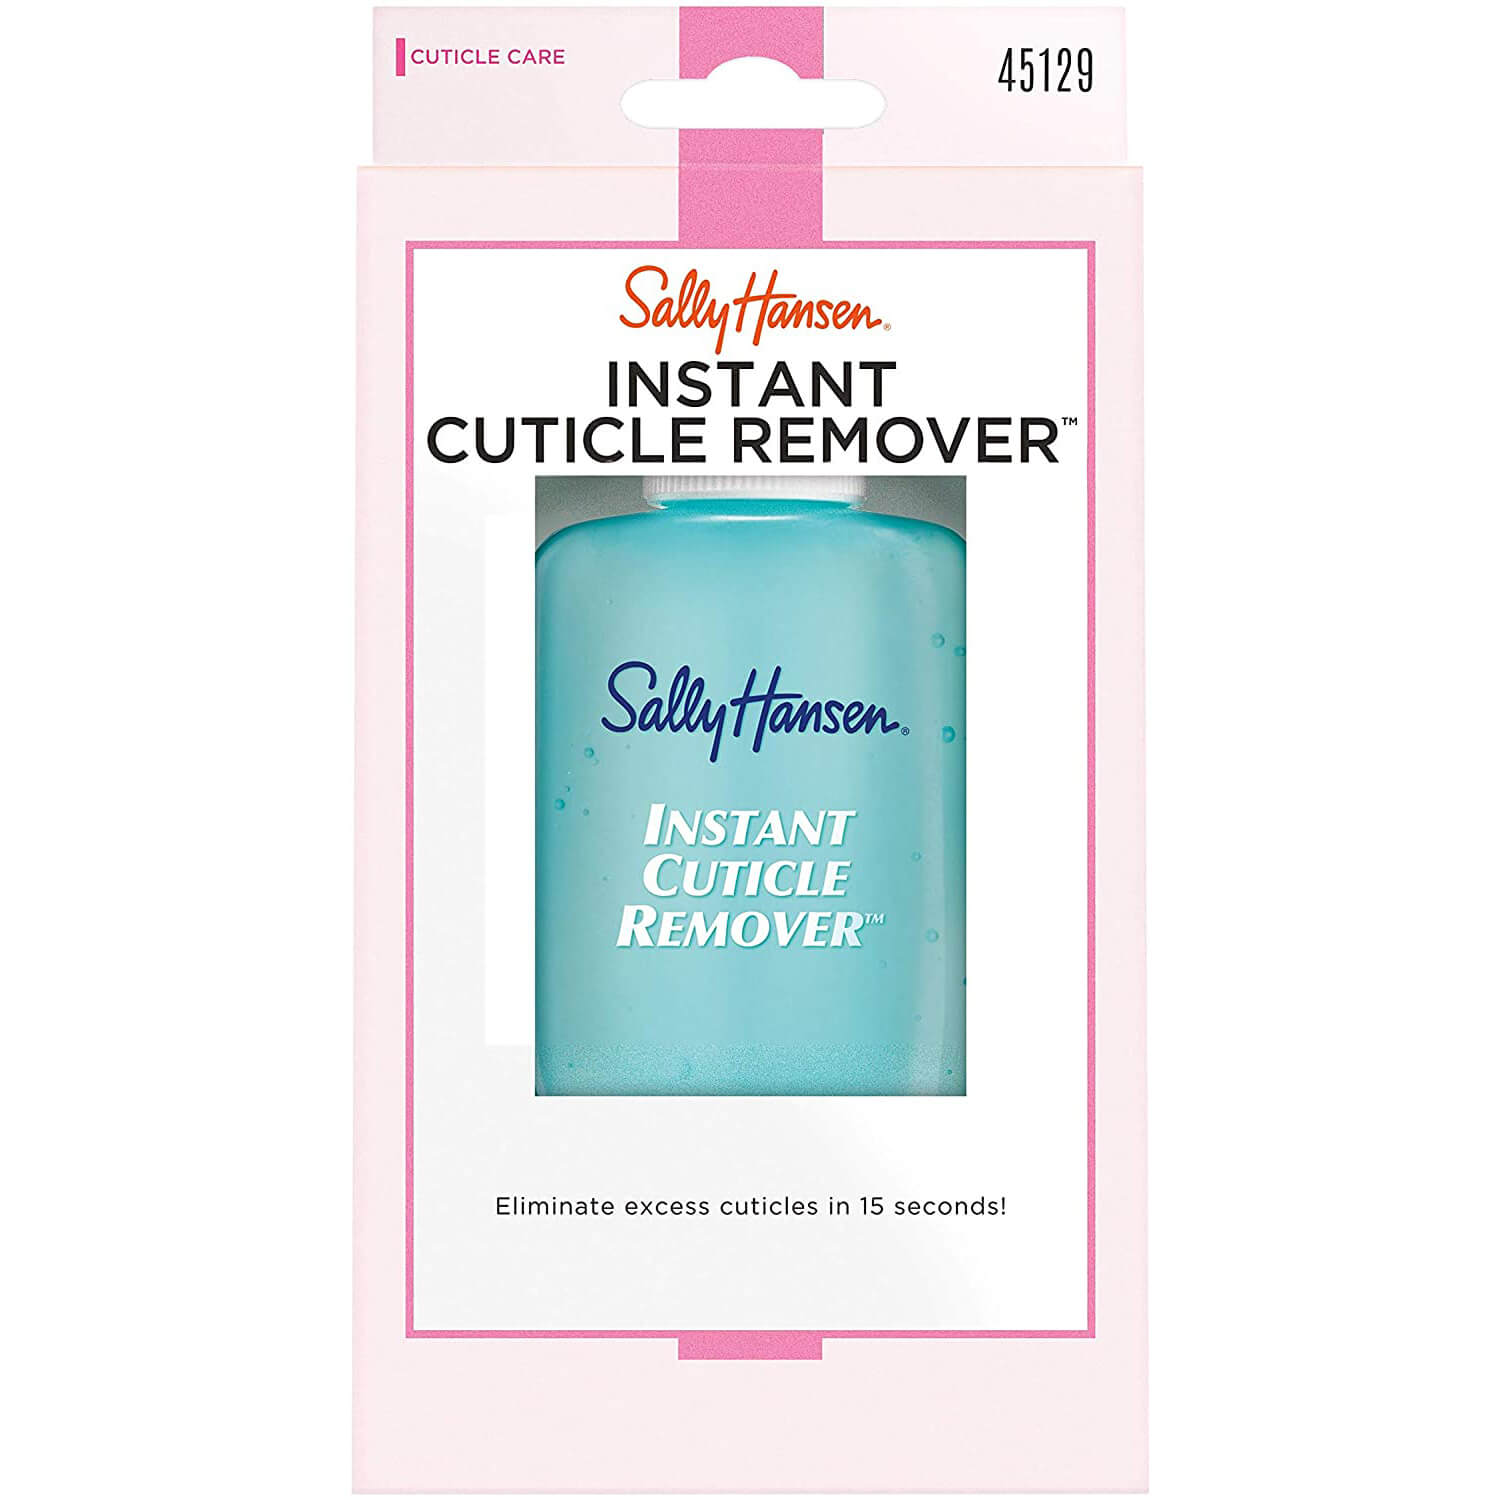 Sally Hansen Instant Cuticle Remover 1 Shaws Department Stores